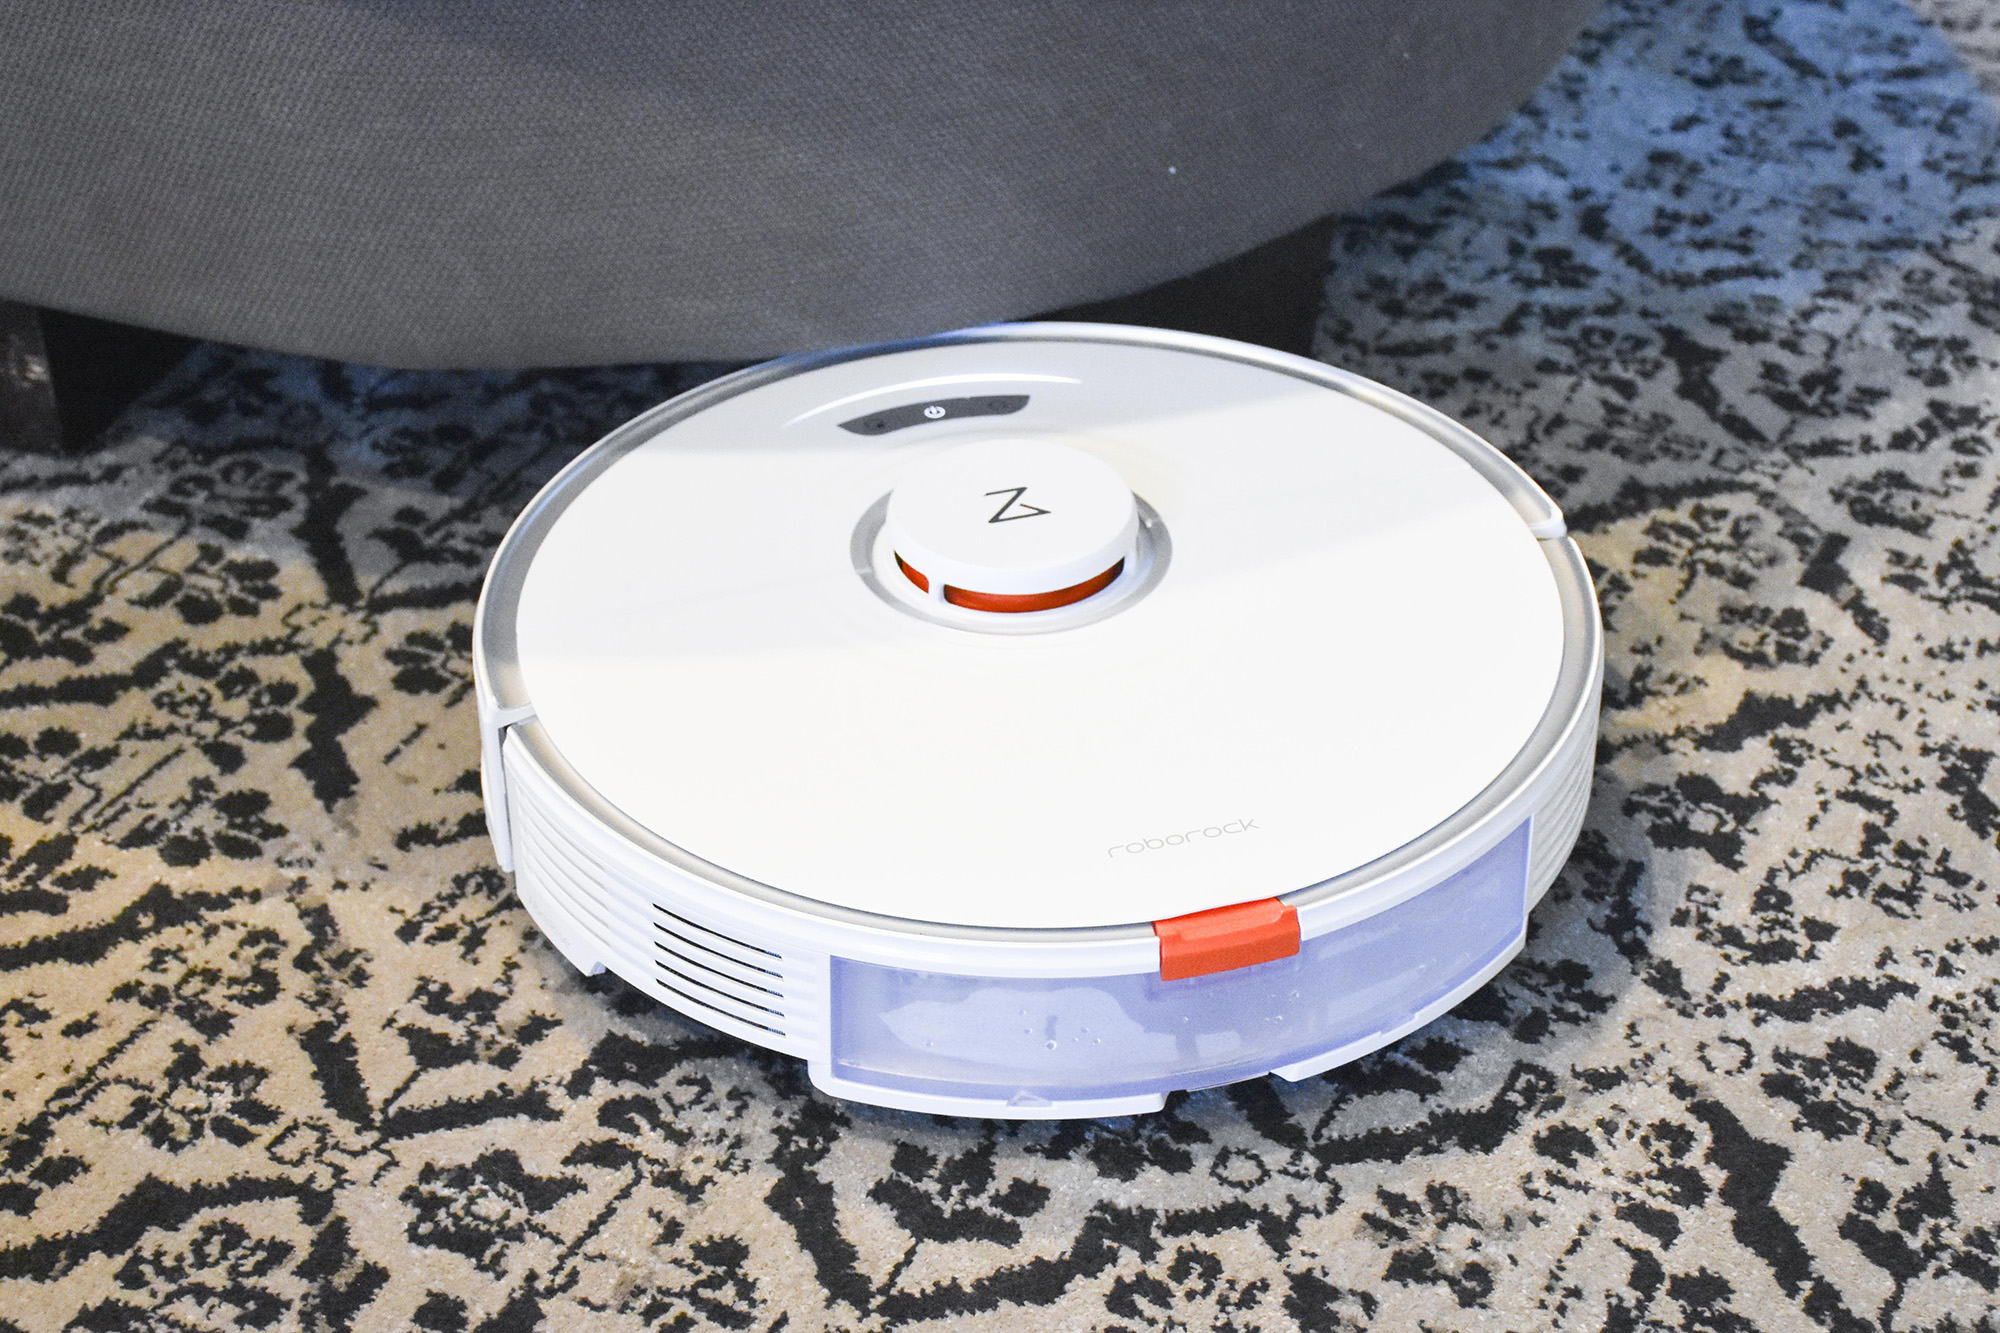 Roborock S7 robot vacuum review: The first hybrid robot vacuum mop I'd  actually use